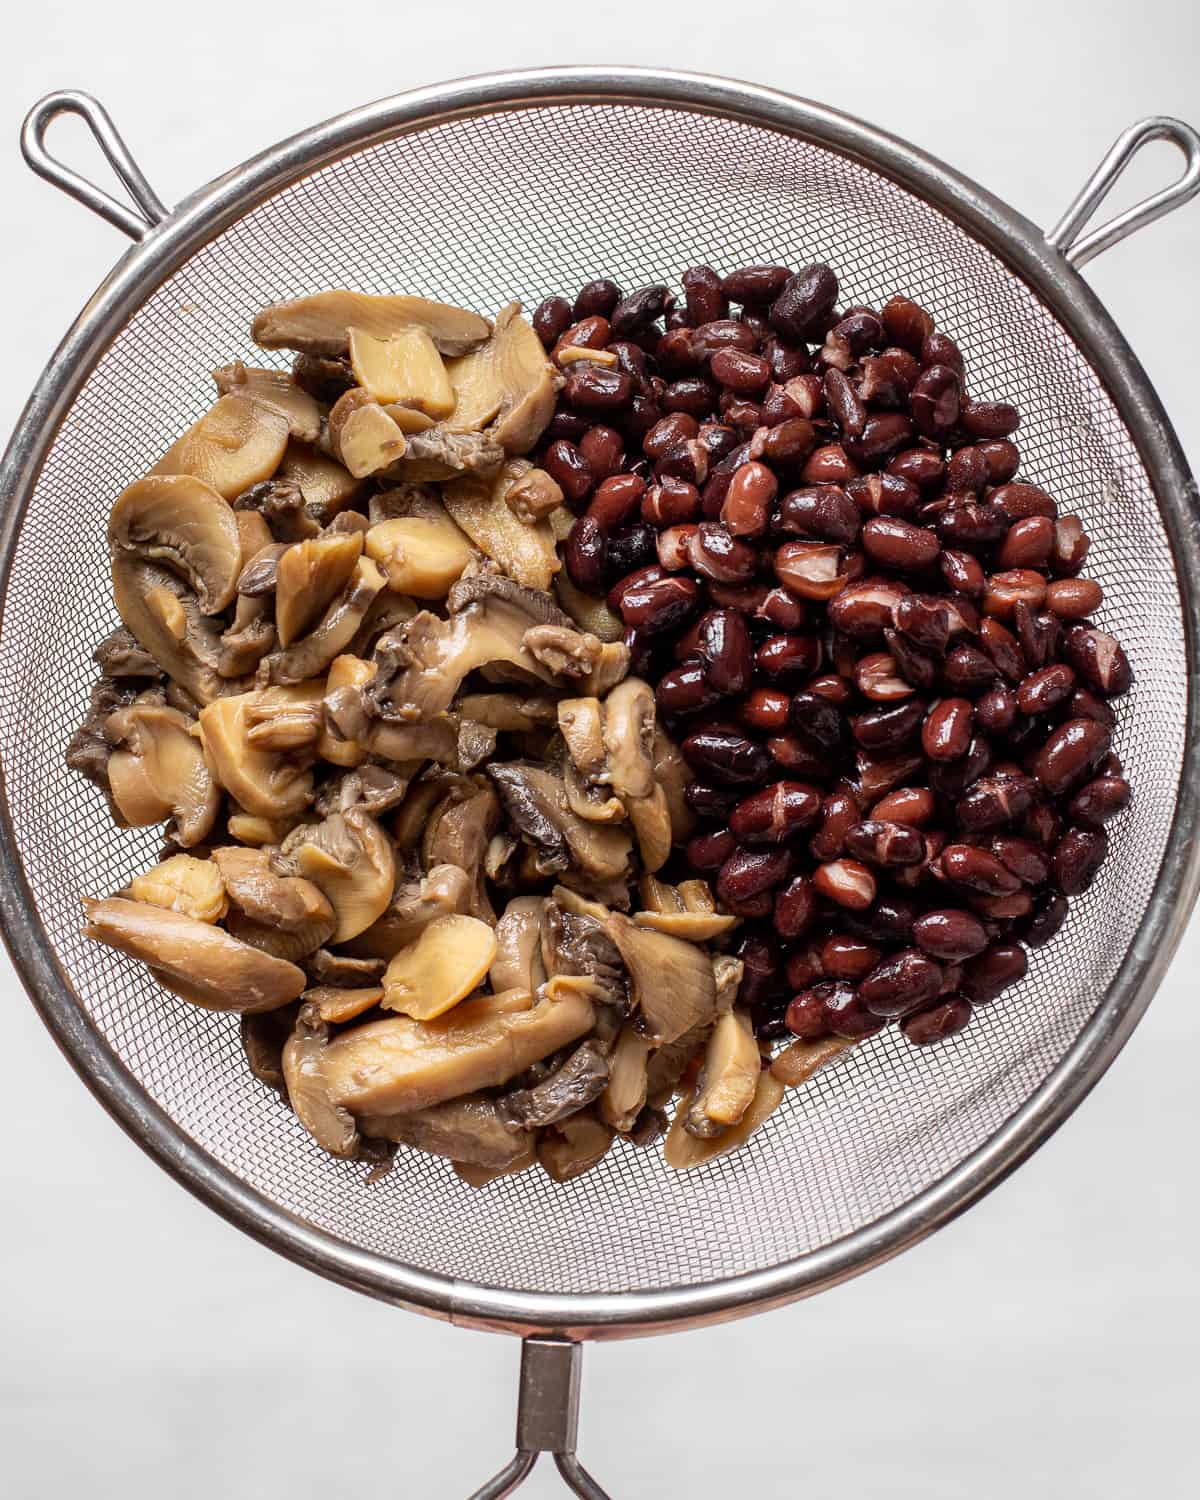 Rinsed canned mushrooms and black beans in a fine-mesh sieve.